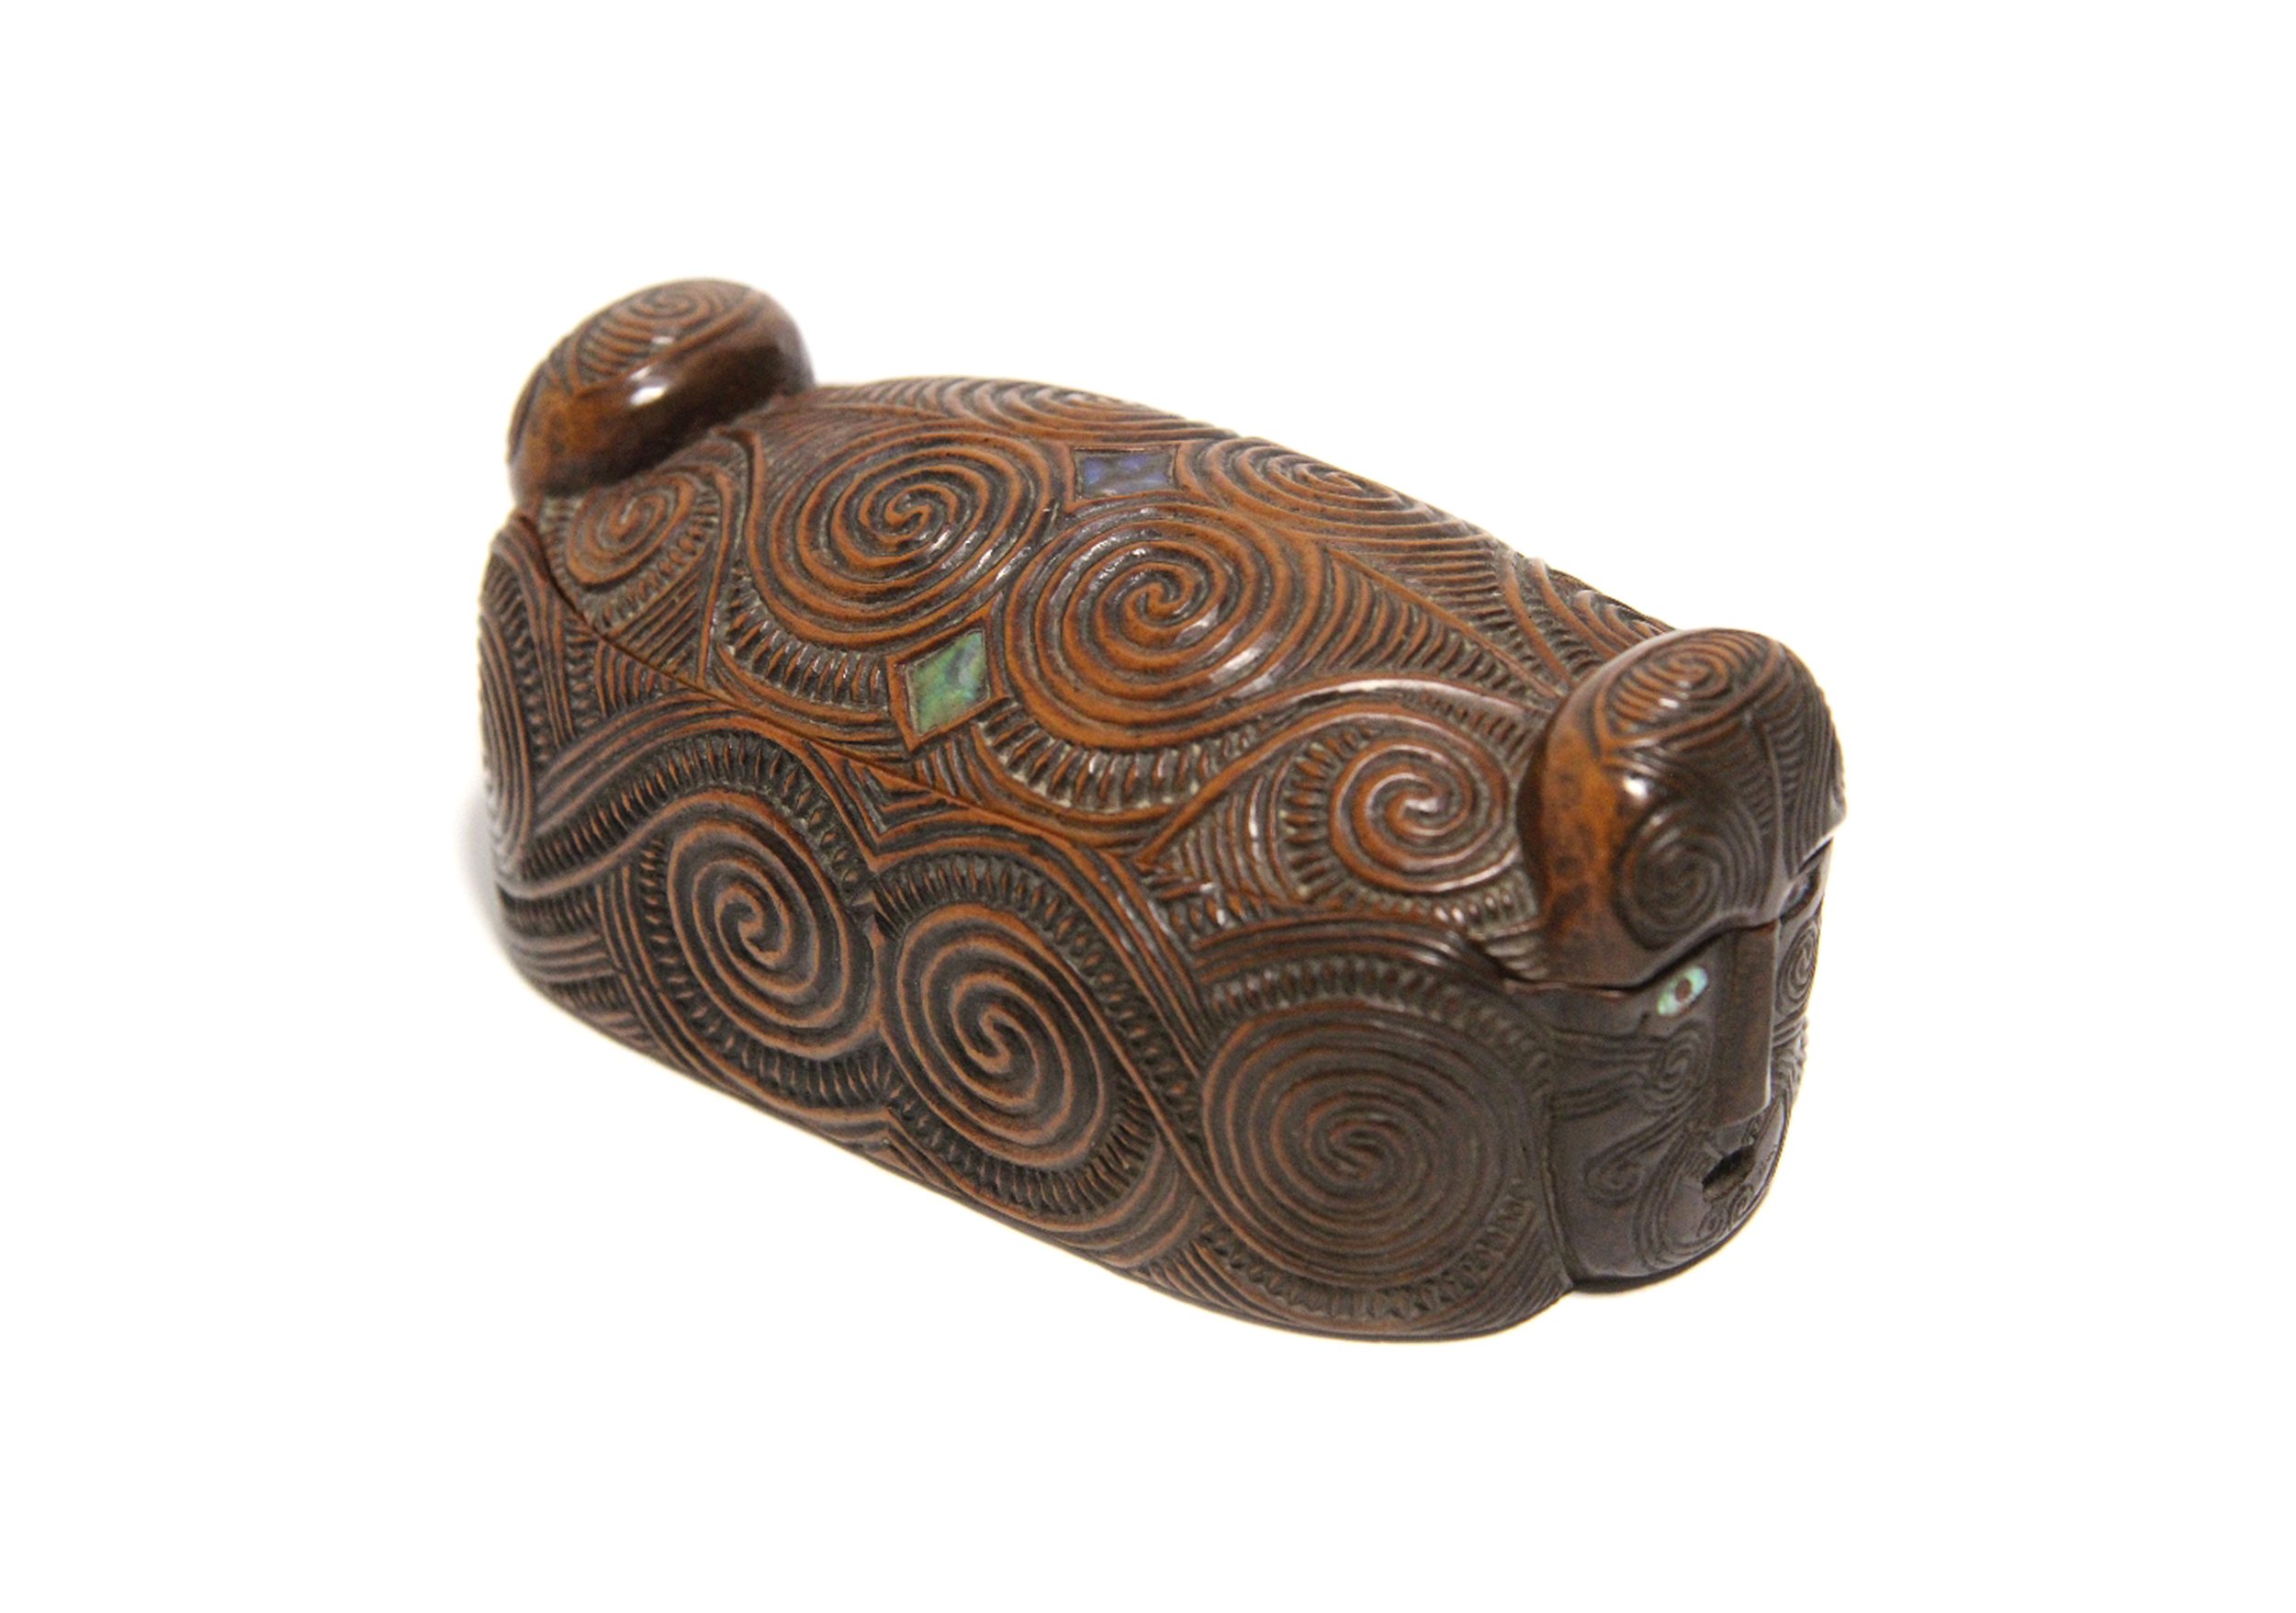 An antique Maori carved feather box